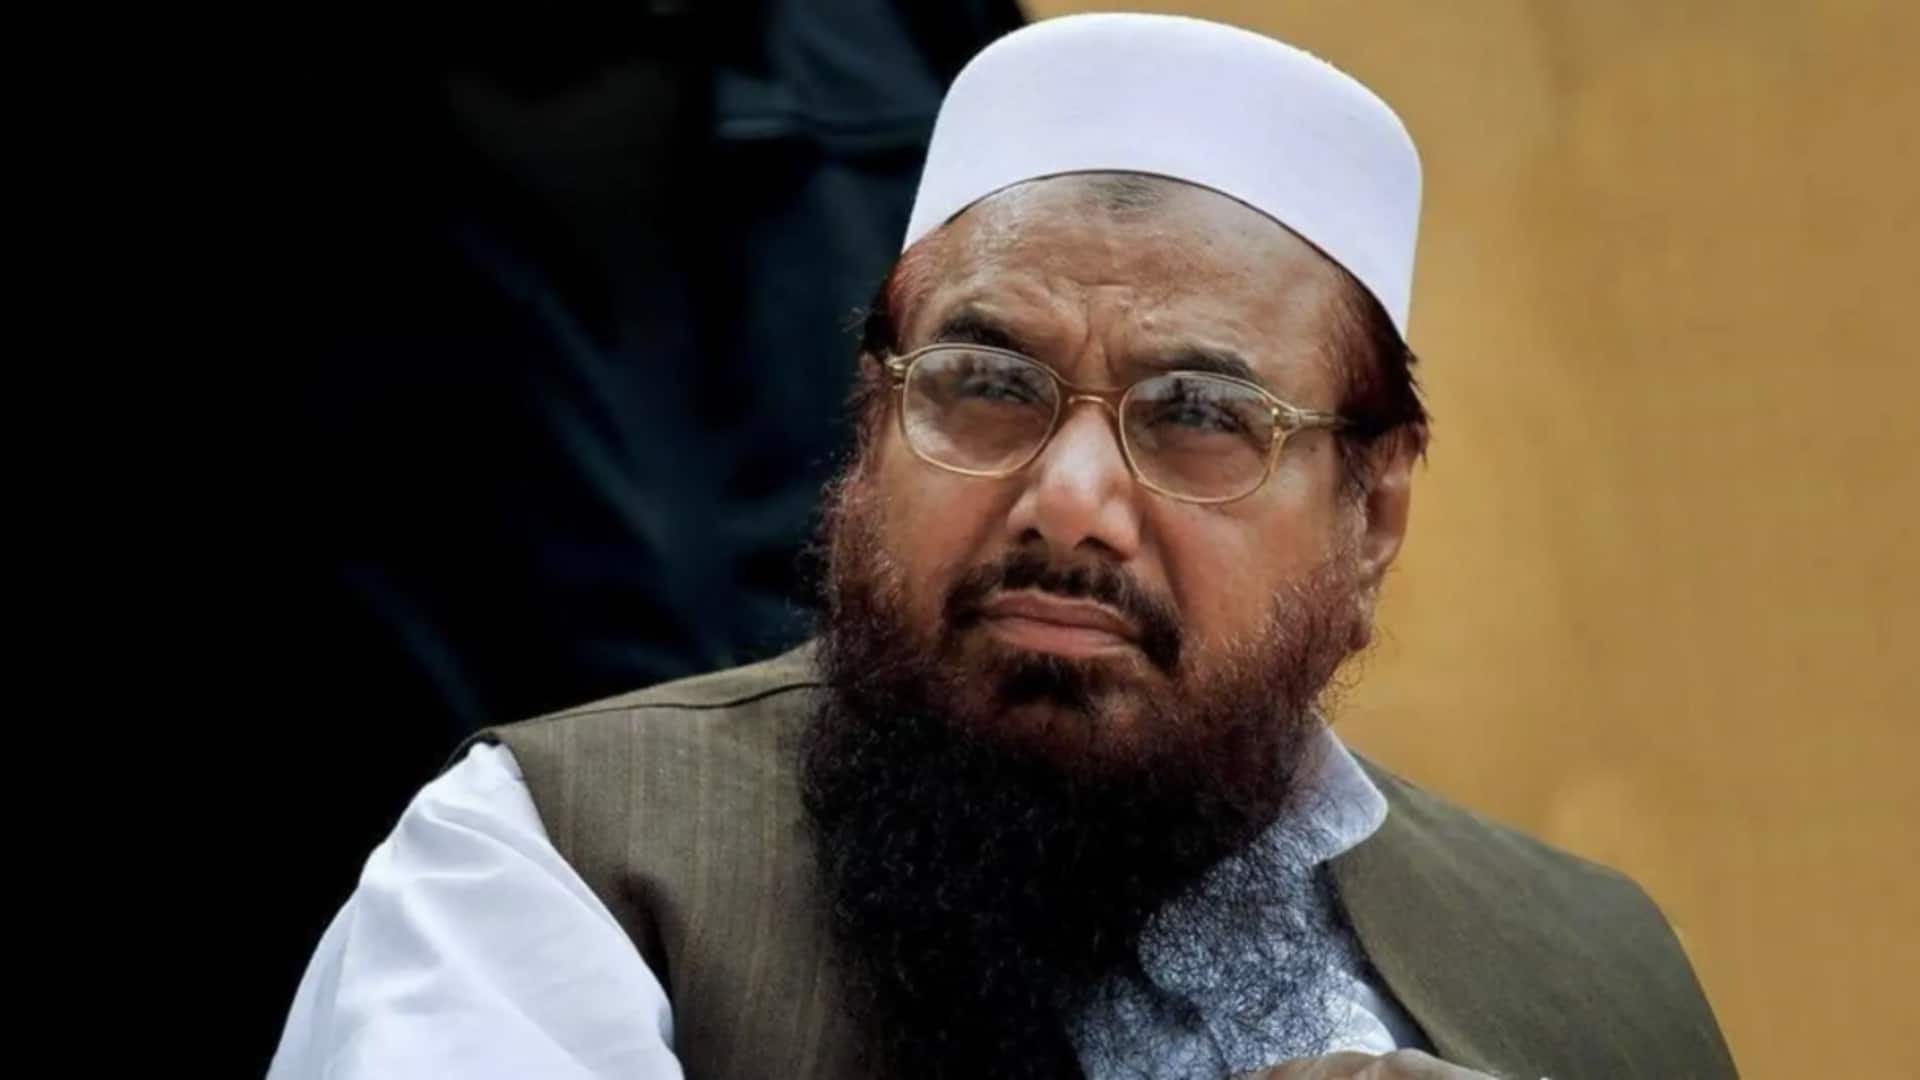 No treaty: Pakistan on India's extradition request for Hafiz Saeed